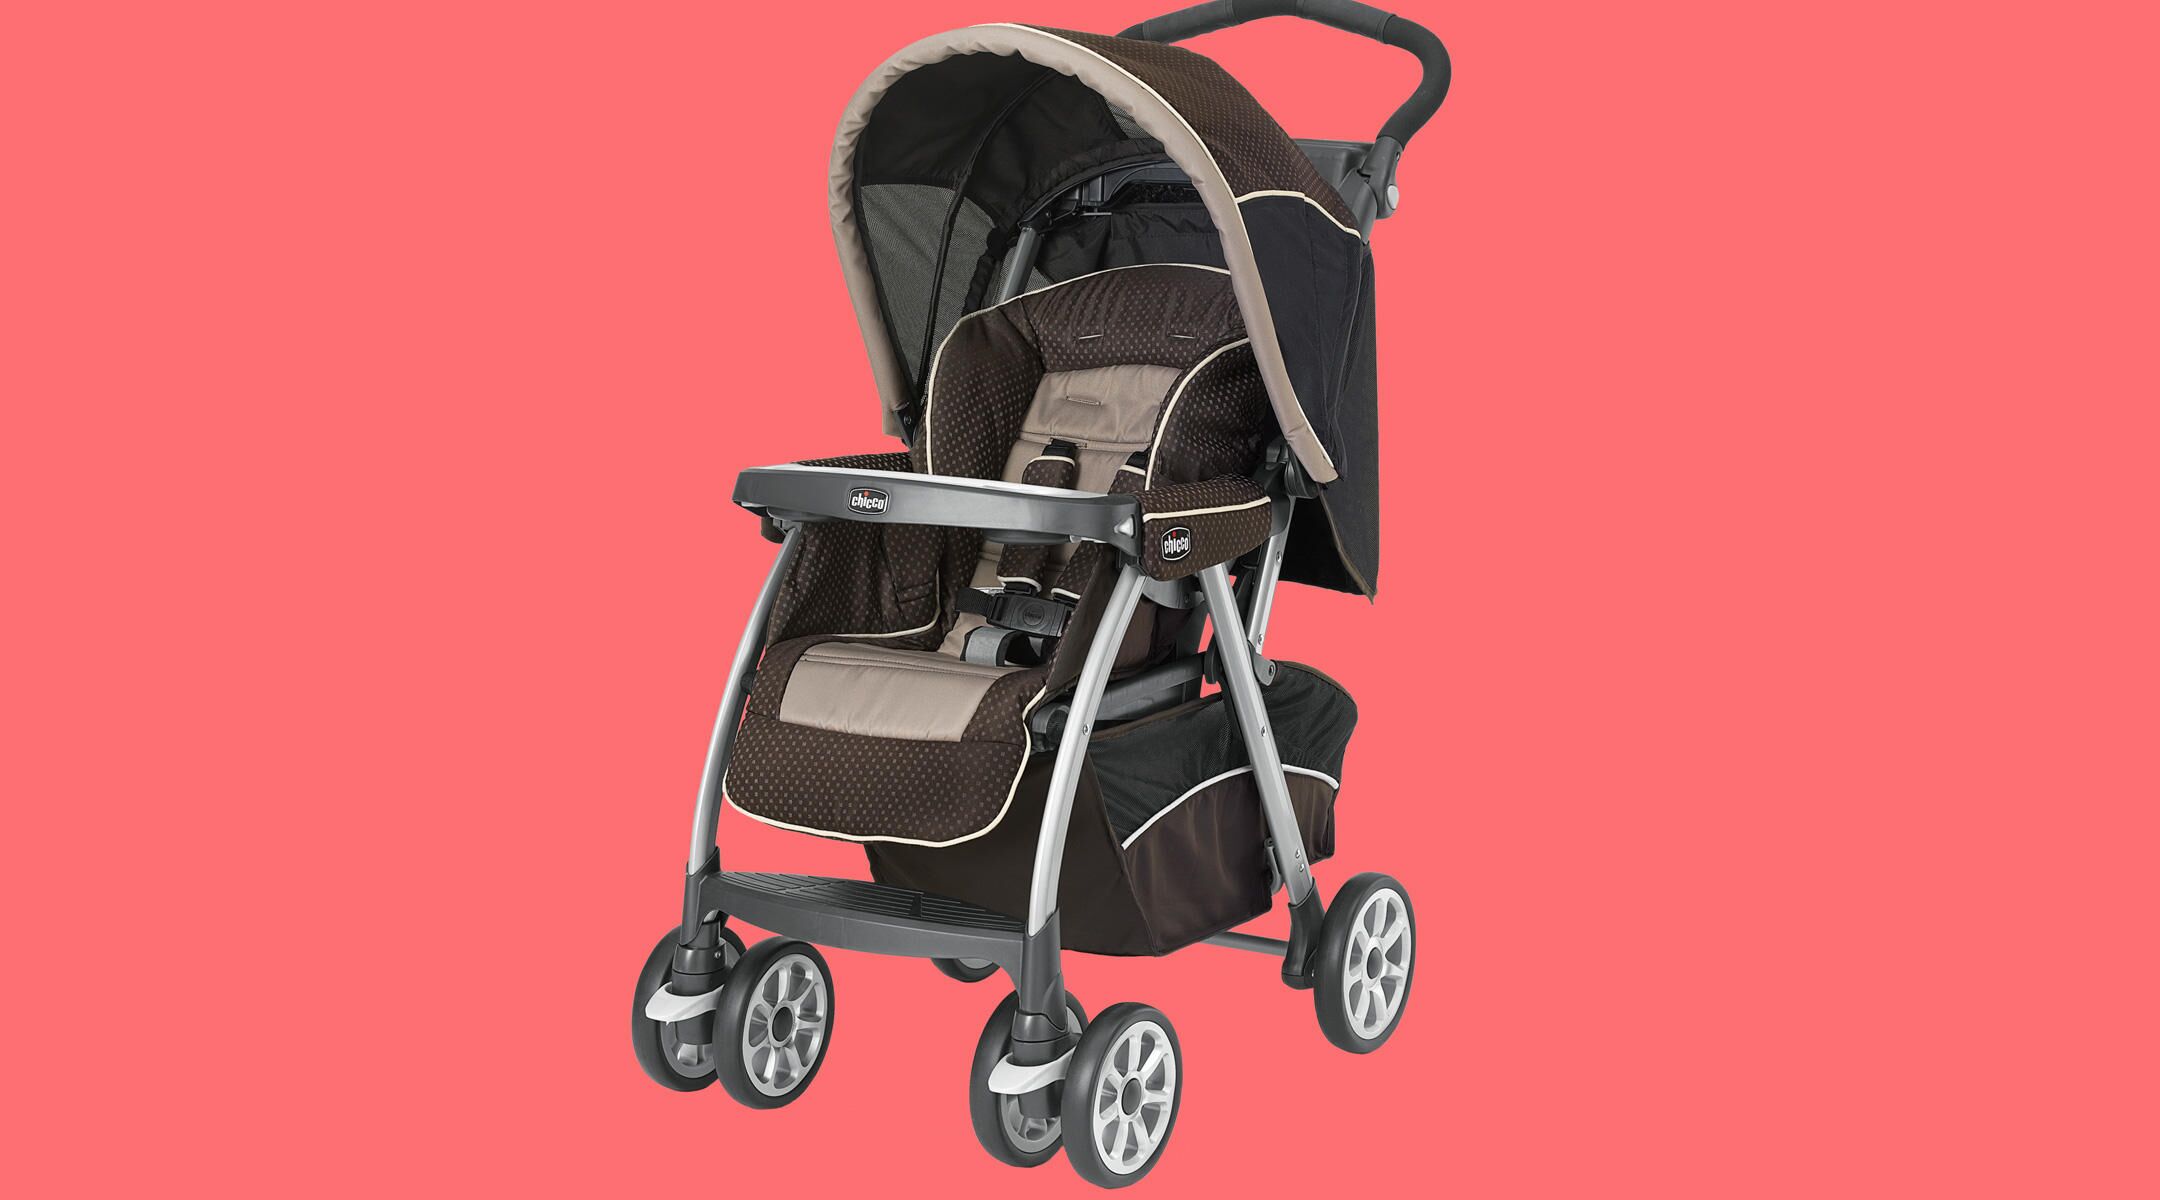 chicco cortina travel system reviews